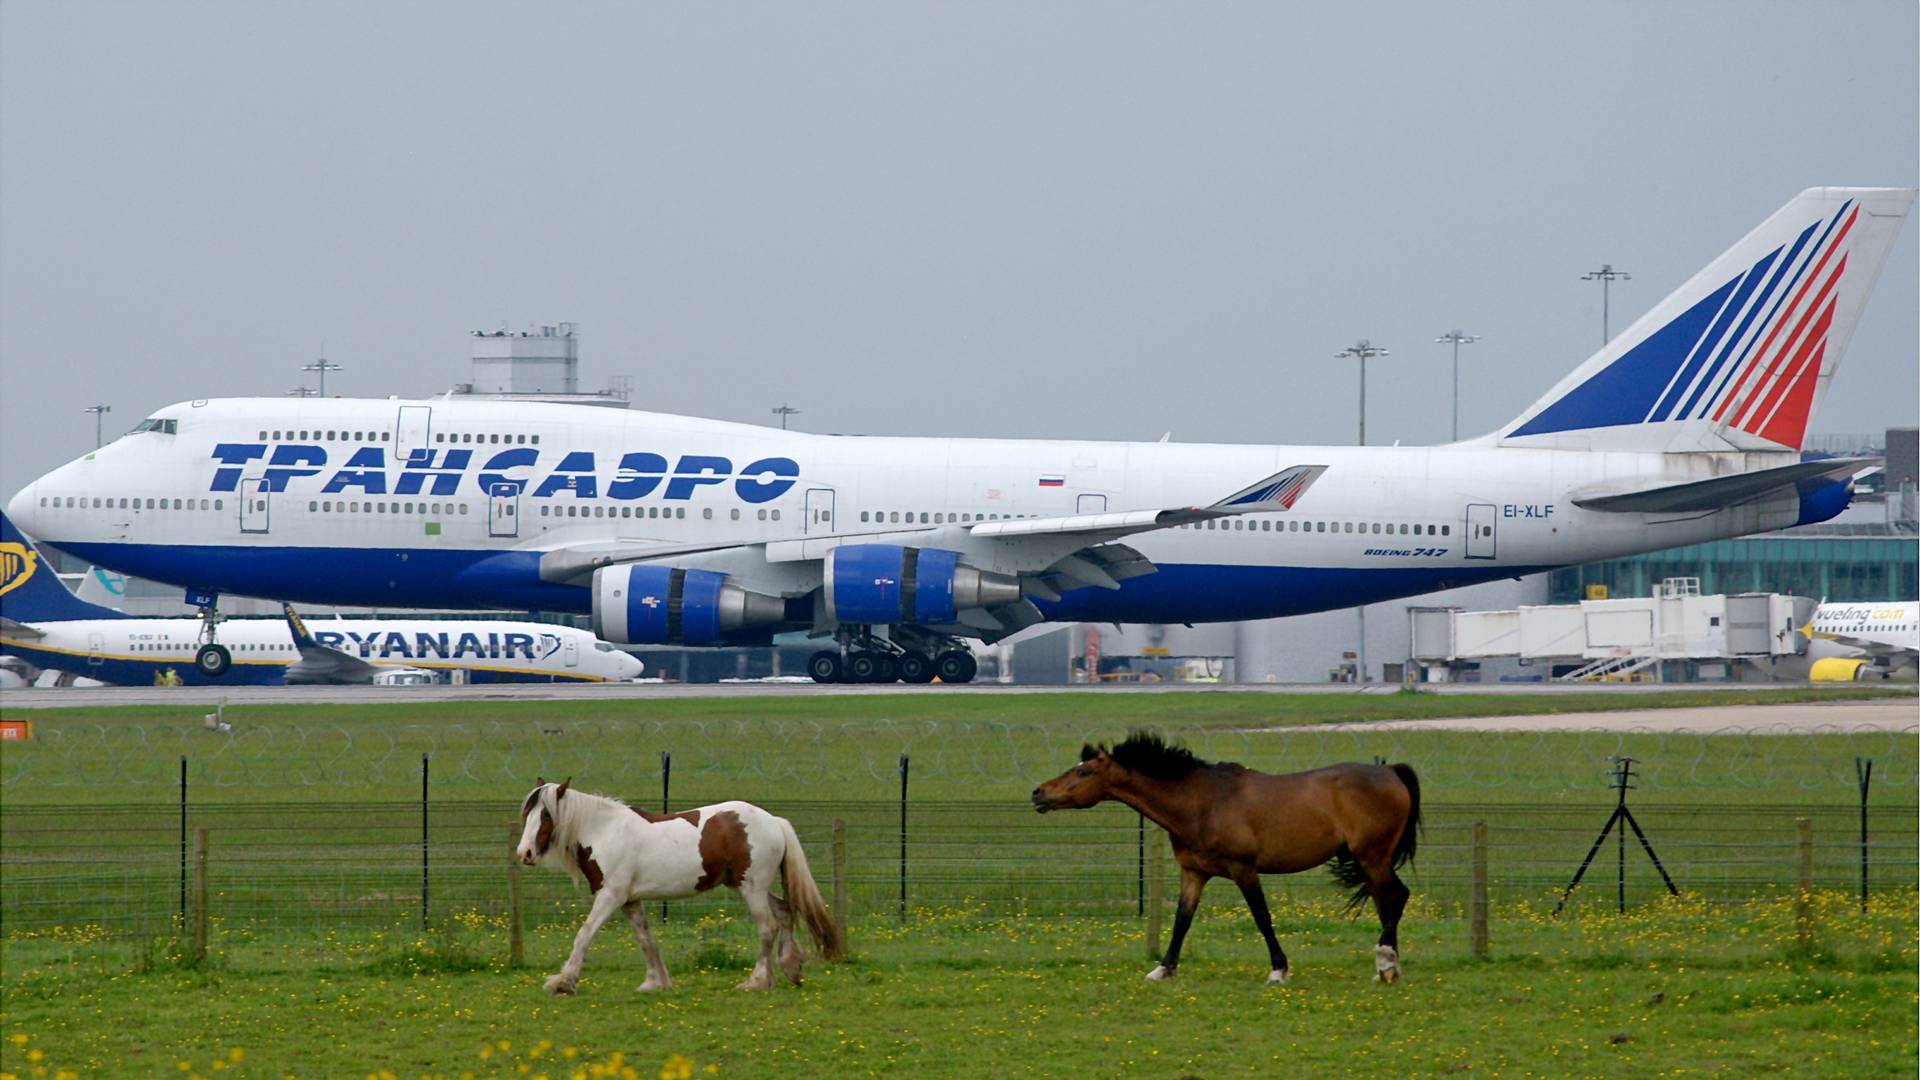 747 Freighter Returns To JFK With Out-of-control Horse!